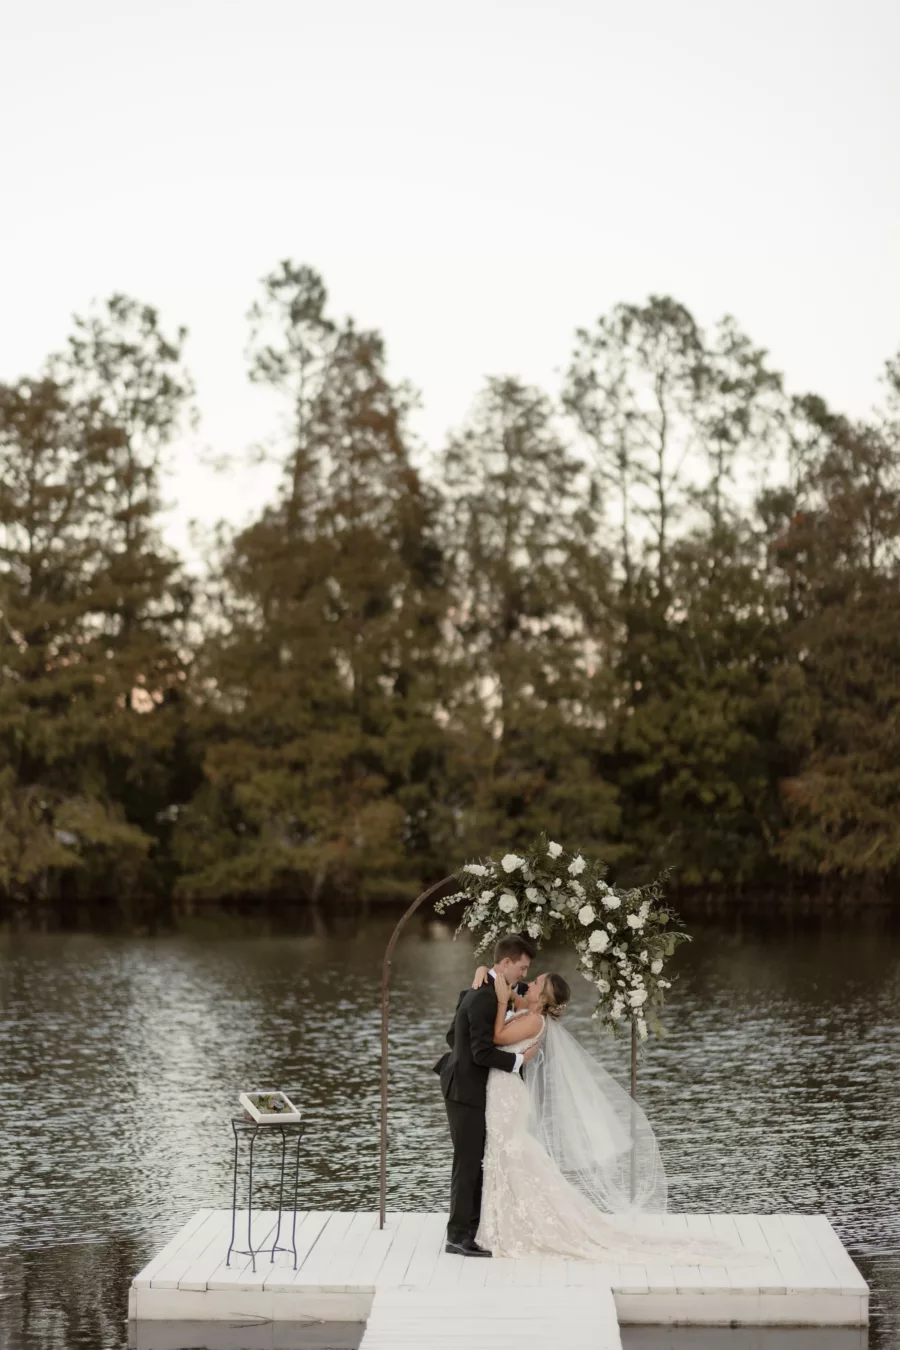 Bride and Groom First Kiss Wedding Portrait | Central Florida Photographer and Videographer Evoke Photo and Film